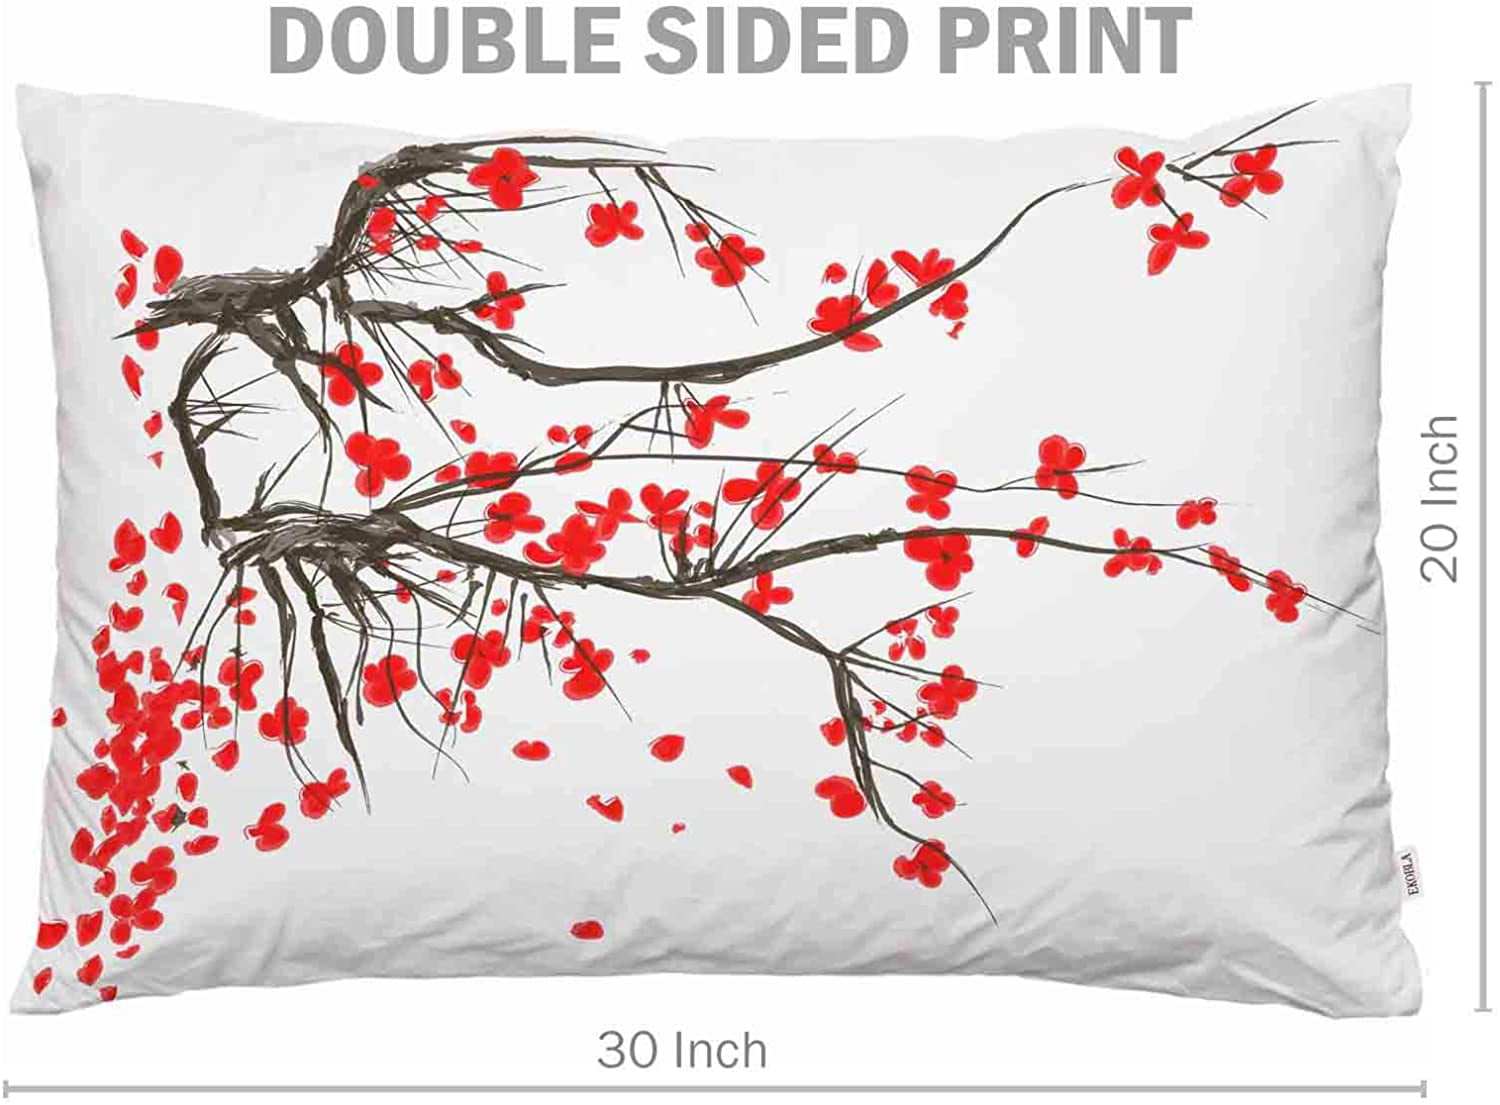 EKOBLA Throw Pillow Cover Japanese Ink Painting Flourishing Flowers Tree Branch Cherry Blossom Spring Art Decor Lumbar Pillow Case Cushion for Sofa Couch Bed Standard Queen Size 20x30 Inch